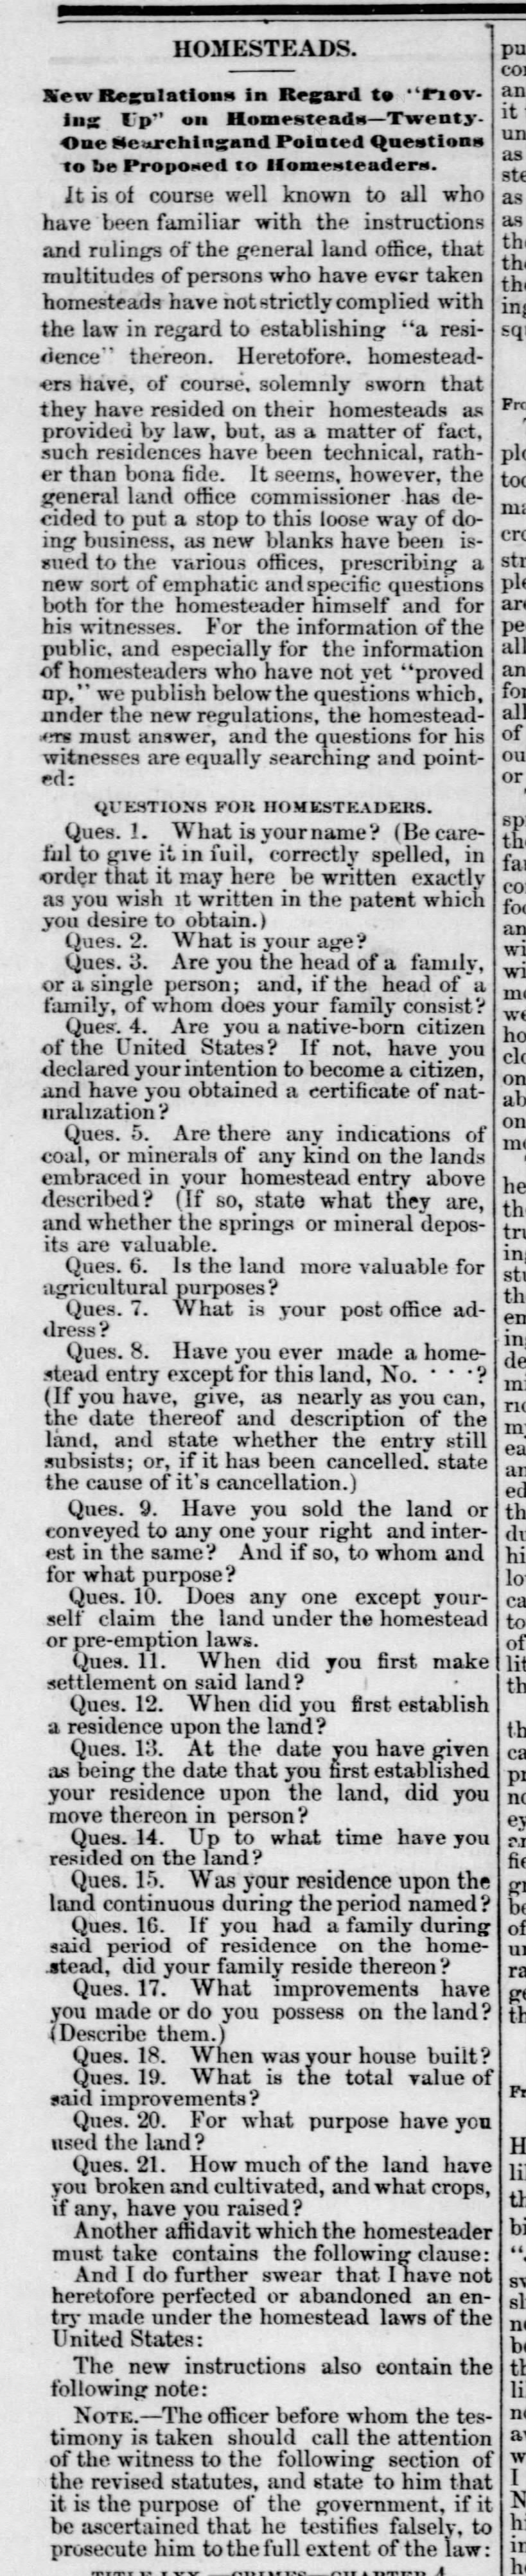 20 questions homesteaders must answer as proof of settlement, 1878